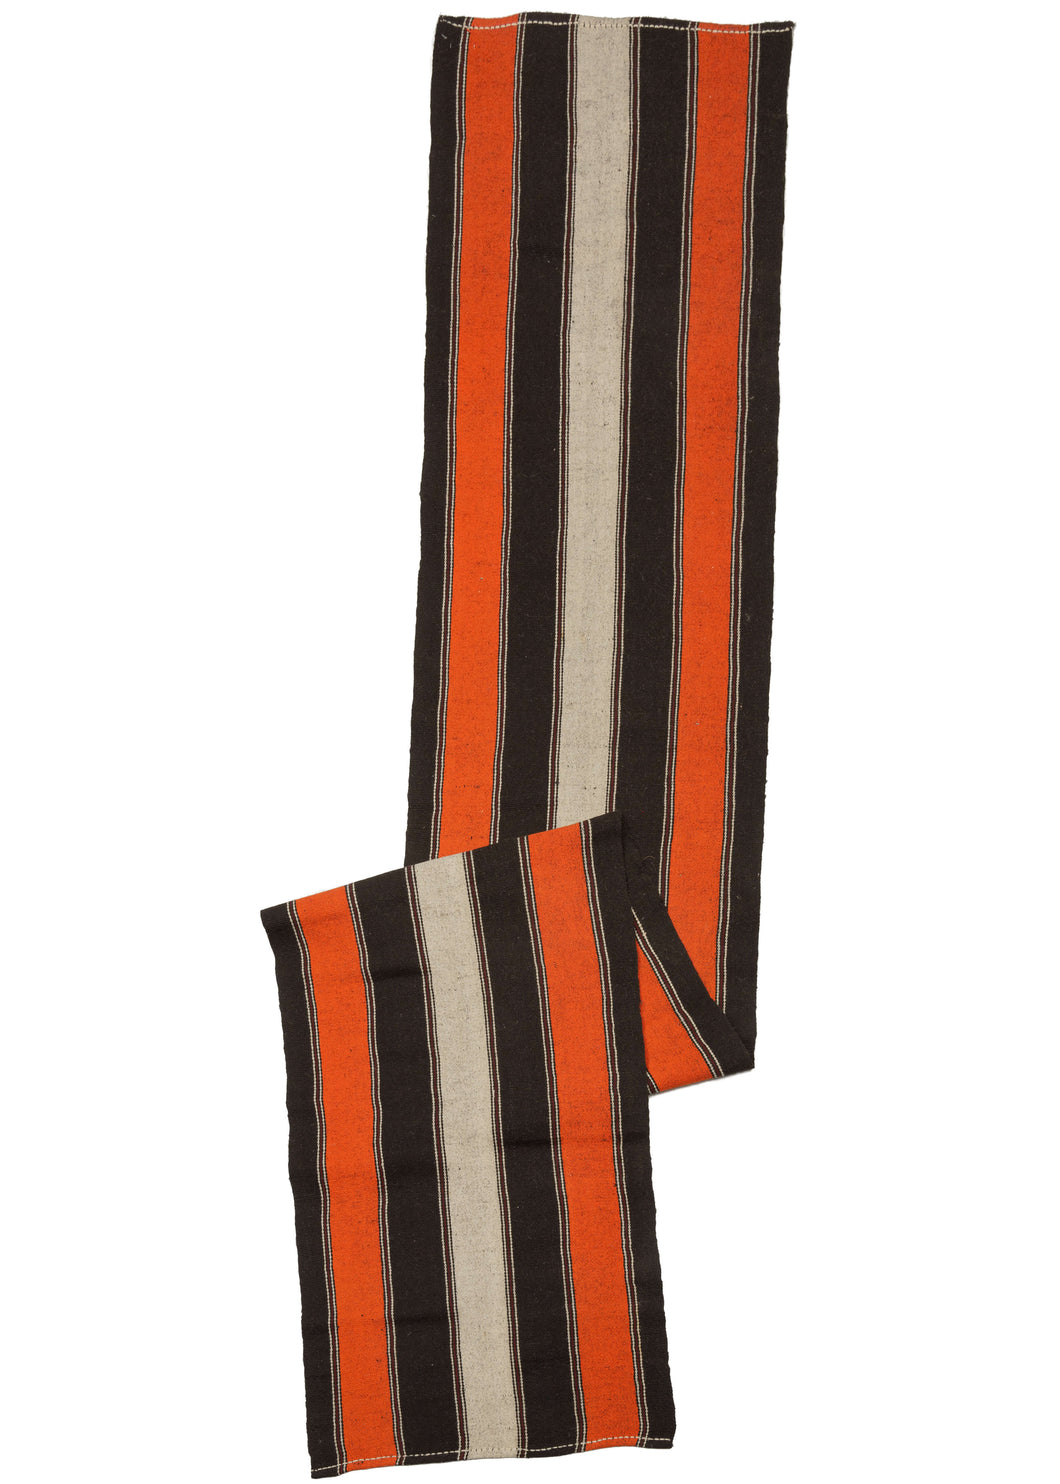 Turkish goat hair kilim runner composed of vertical stripes in blocks of orange, brown, and white with burgundy highlights. There is a central white stripe, followed by alternating black and orange stripes. Thin burgundy stripes outlined in white provide definition to the design. Goat hair is mixed in with the wool, making this a very sturdy and hard-wearing rug. 